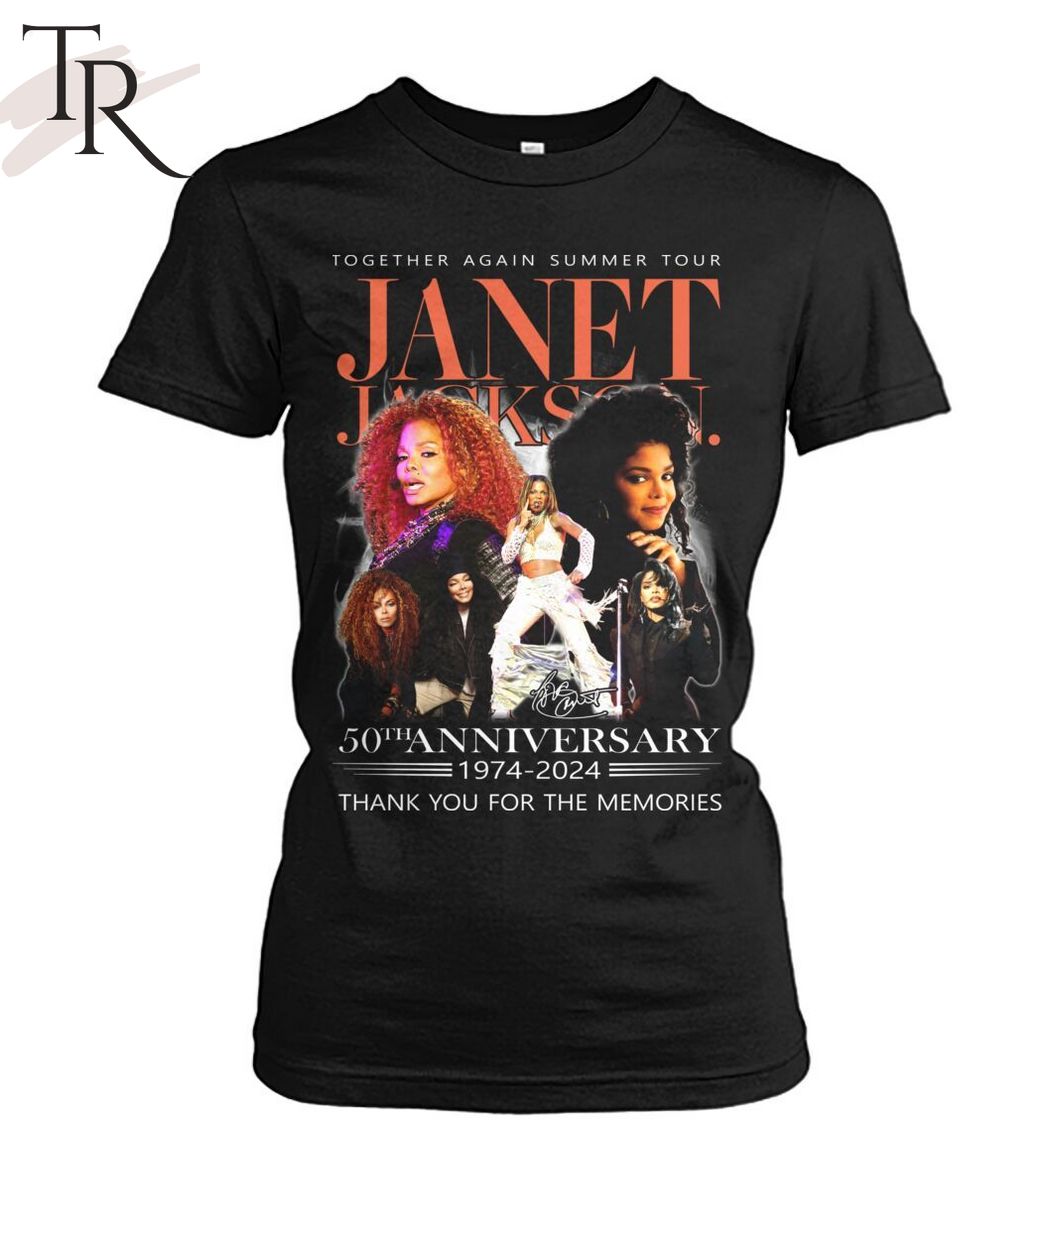 Together Again Summer Tour Janet Jackson 50th Anniversary 1974 - 2024 Thank You For The Memories T-Shirt